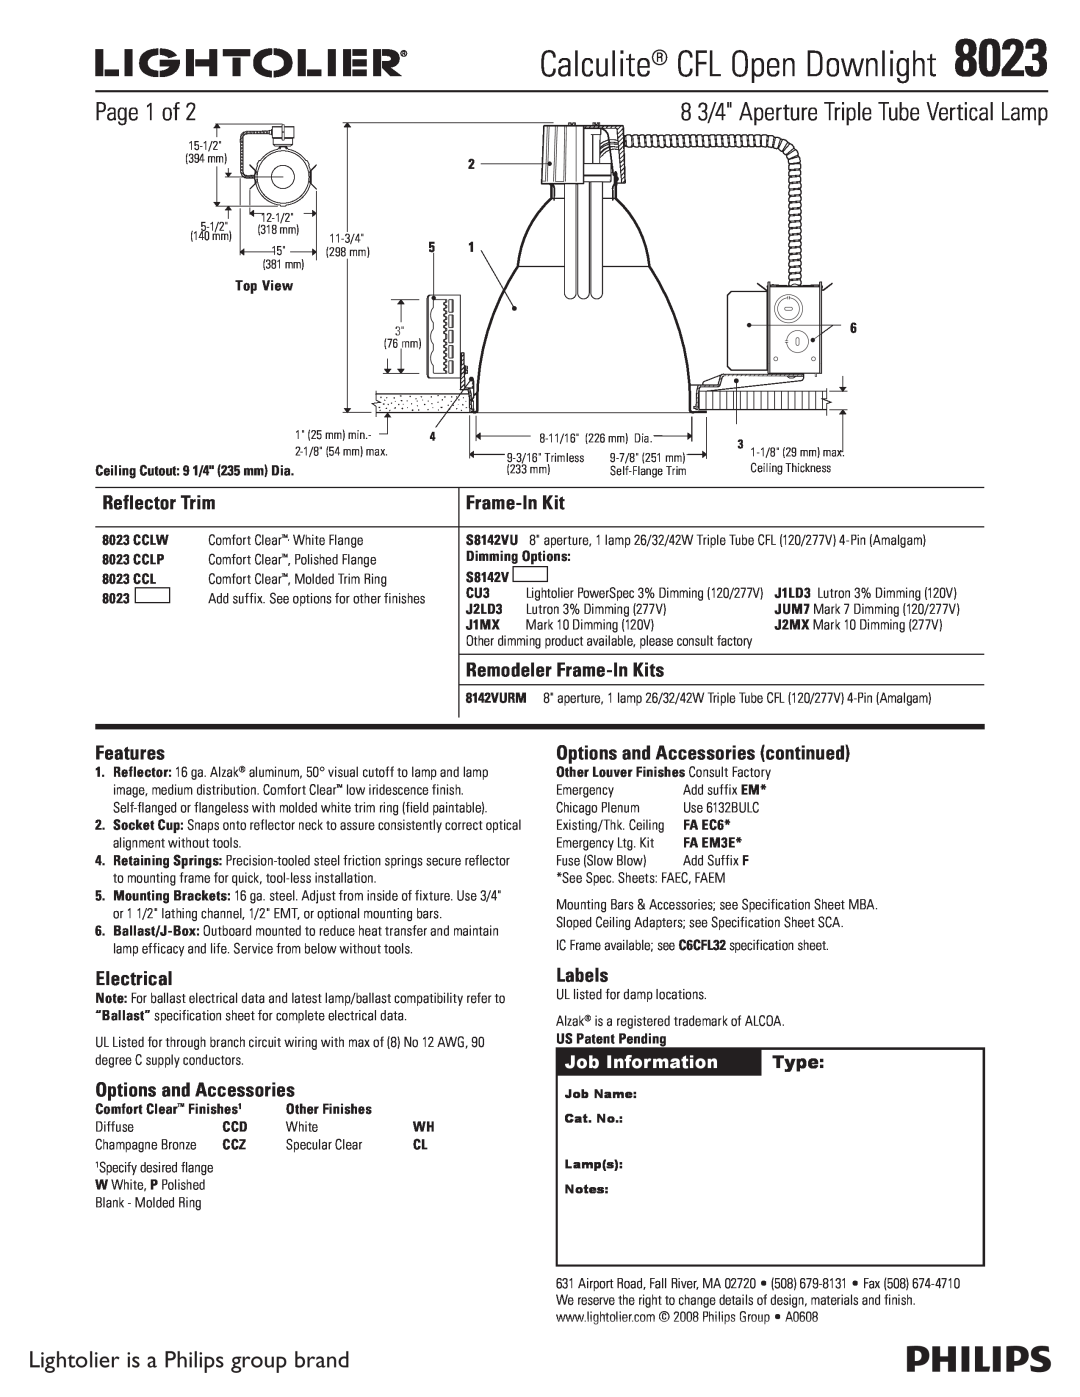 Lightolier C4P20GD specifications Page 1 of, Lightolier is a Philips group brand, 8 3/4 Aperture Triple Tube Vertical Lamp 